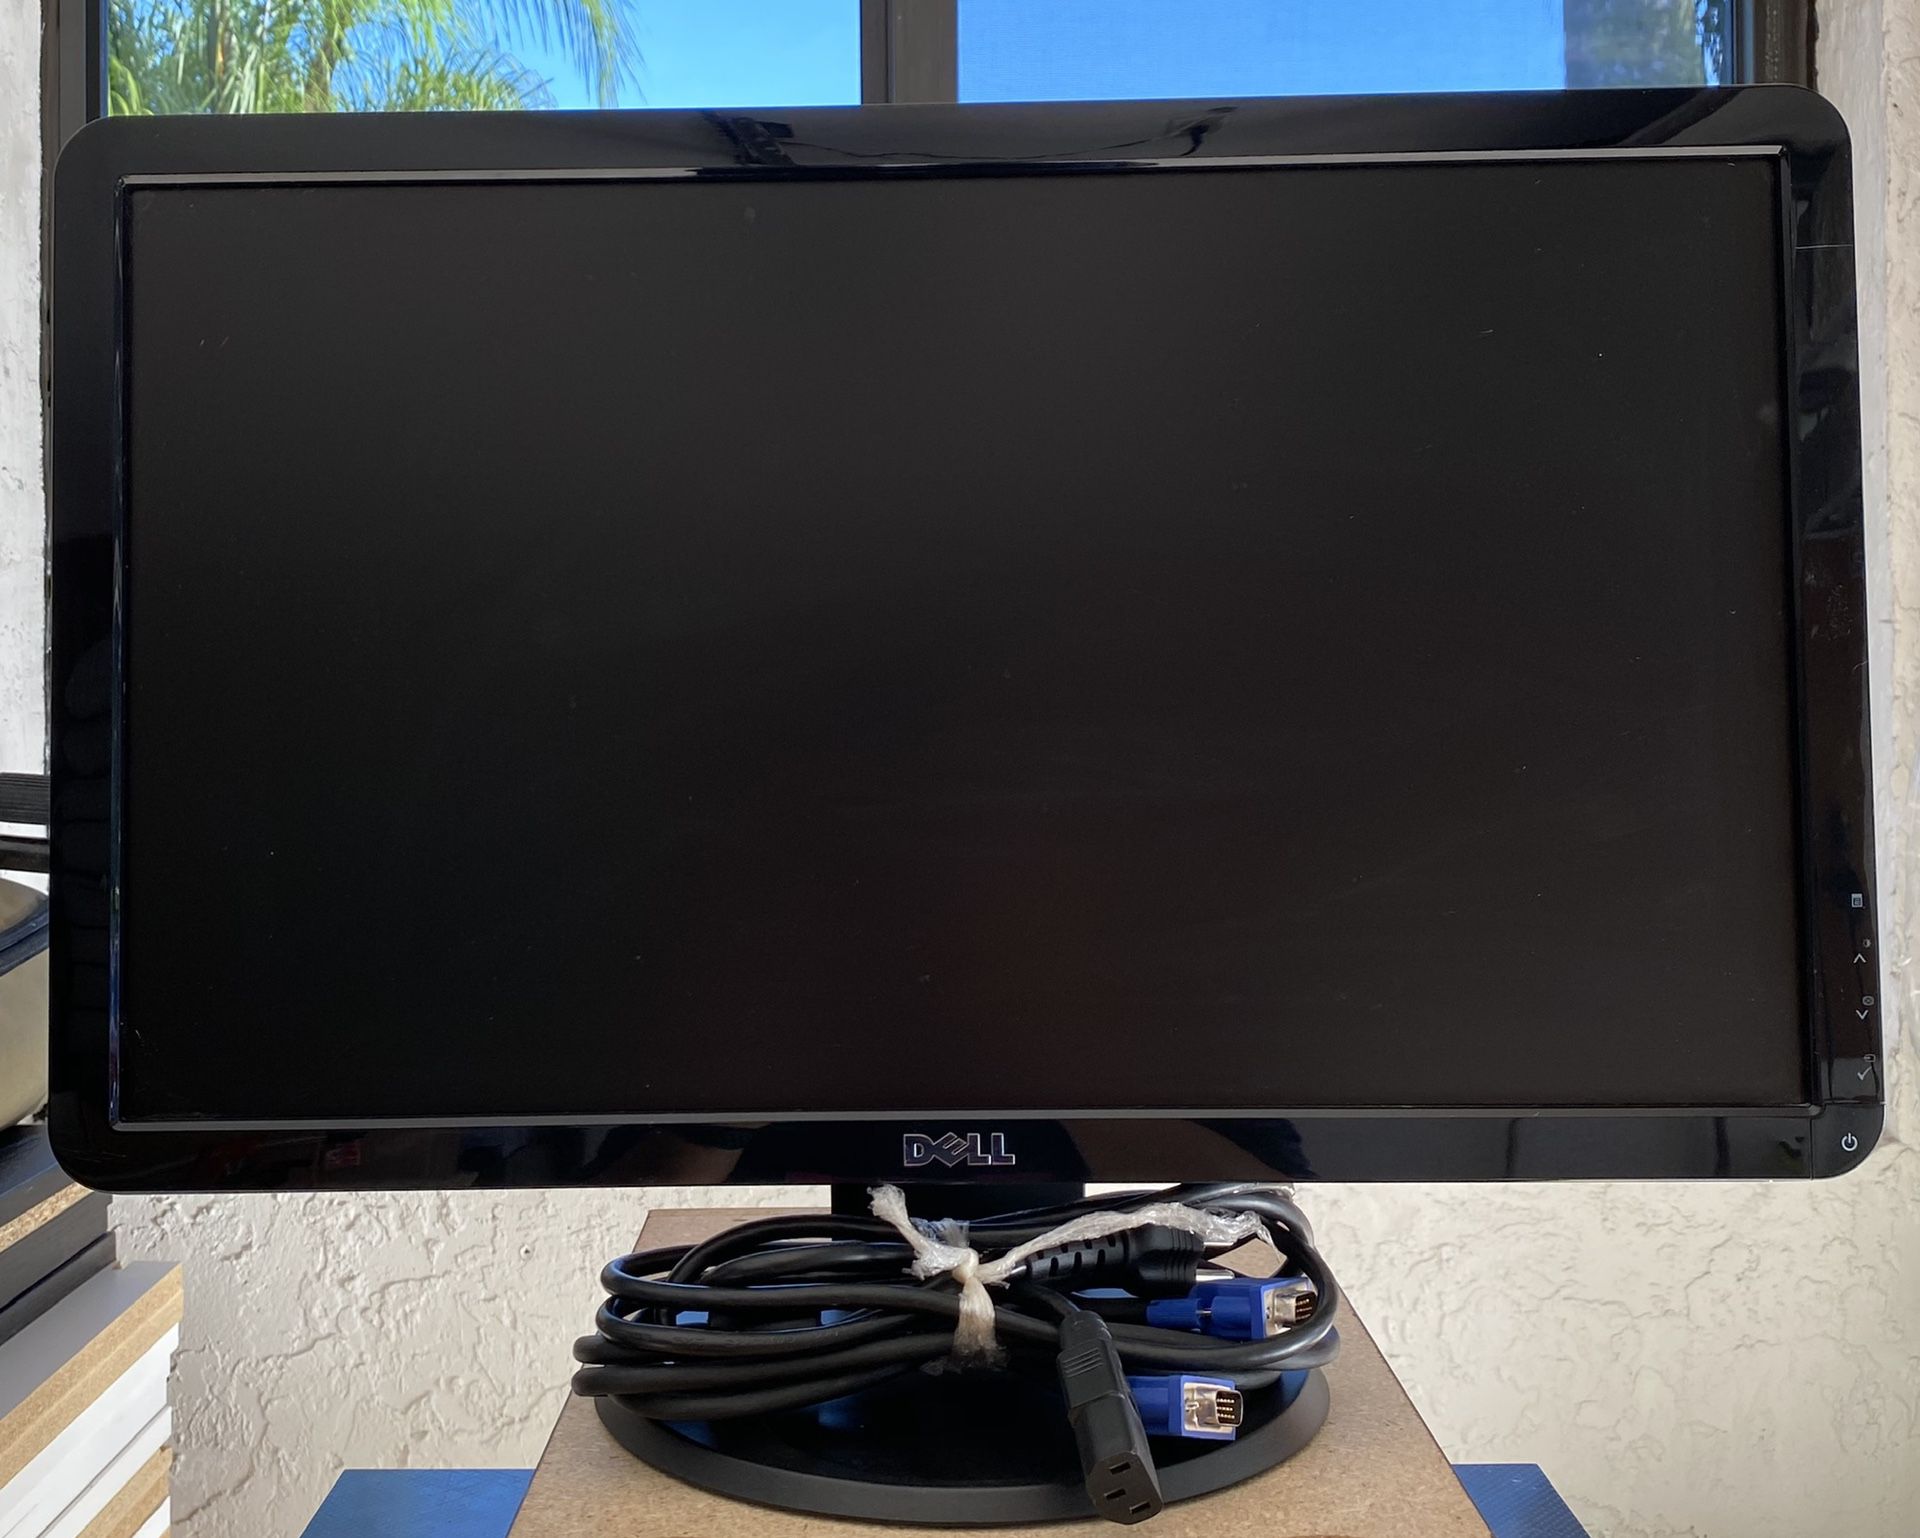 Computer Monitor 21.5 Inch with Home Theater Speaker system